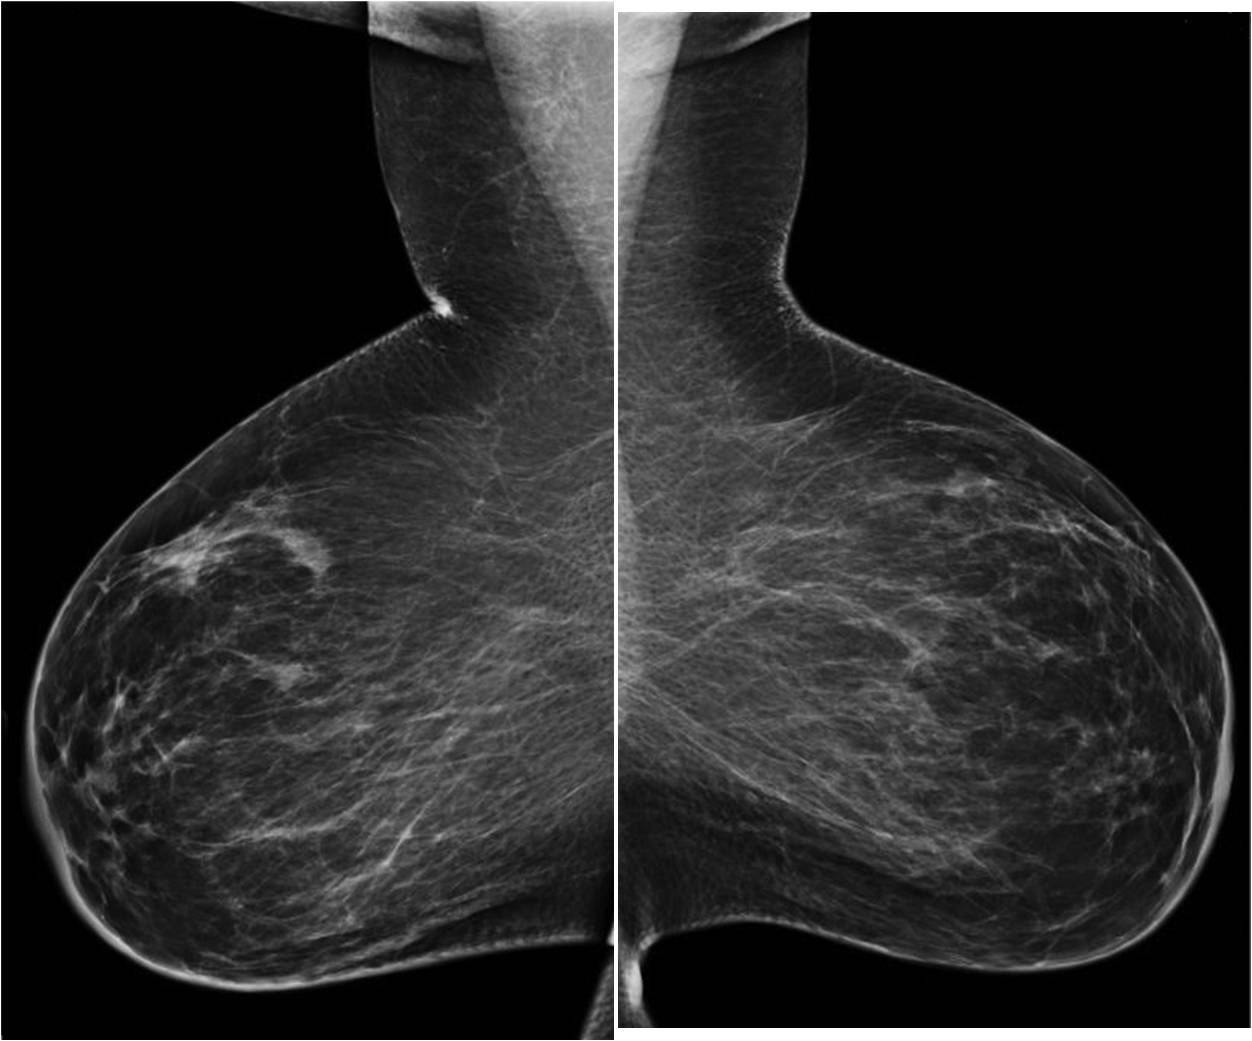 The benefit of a complete breast imaging workup